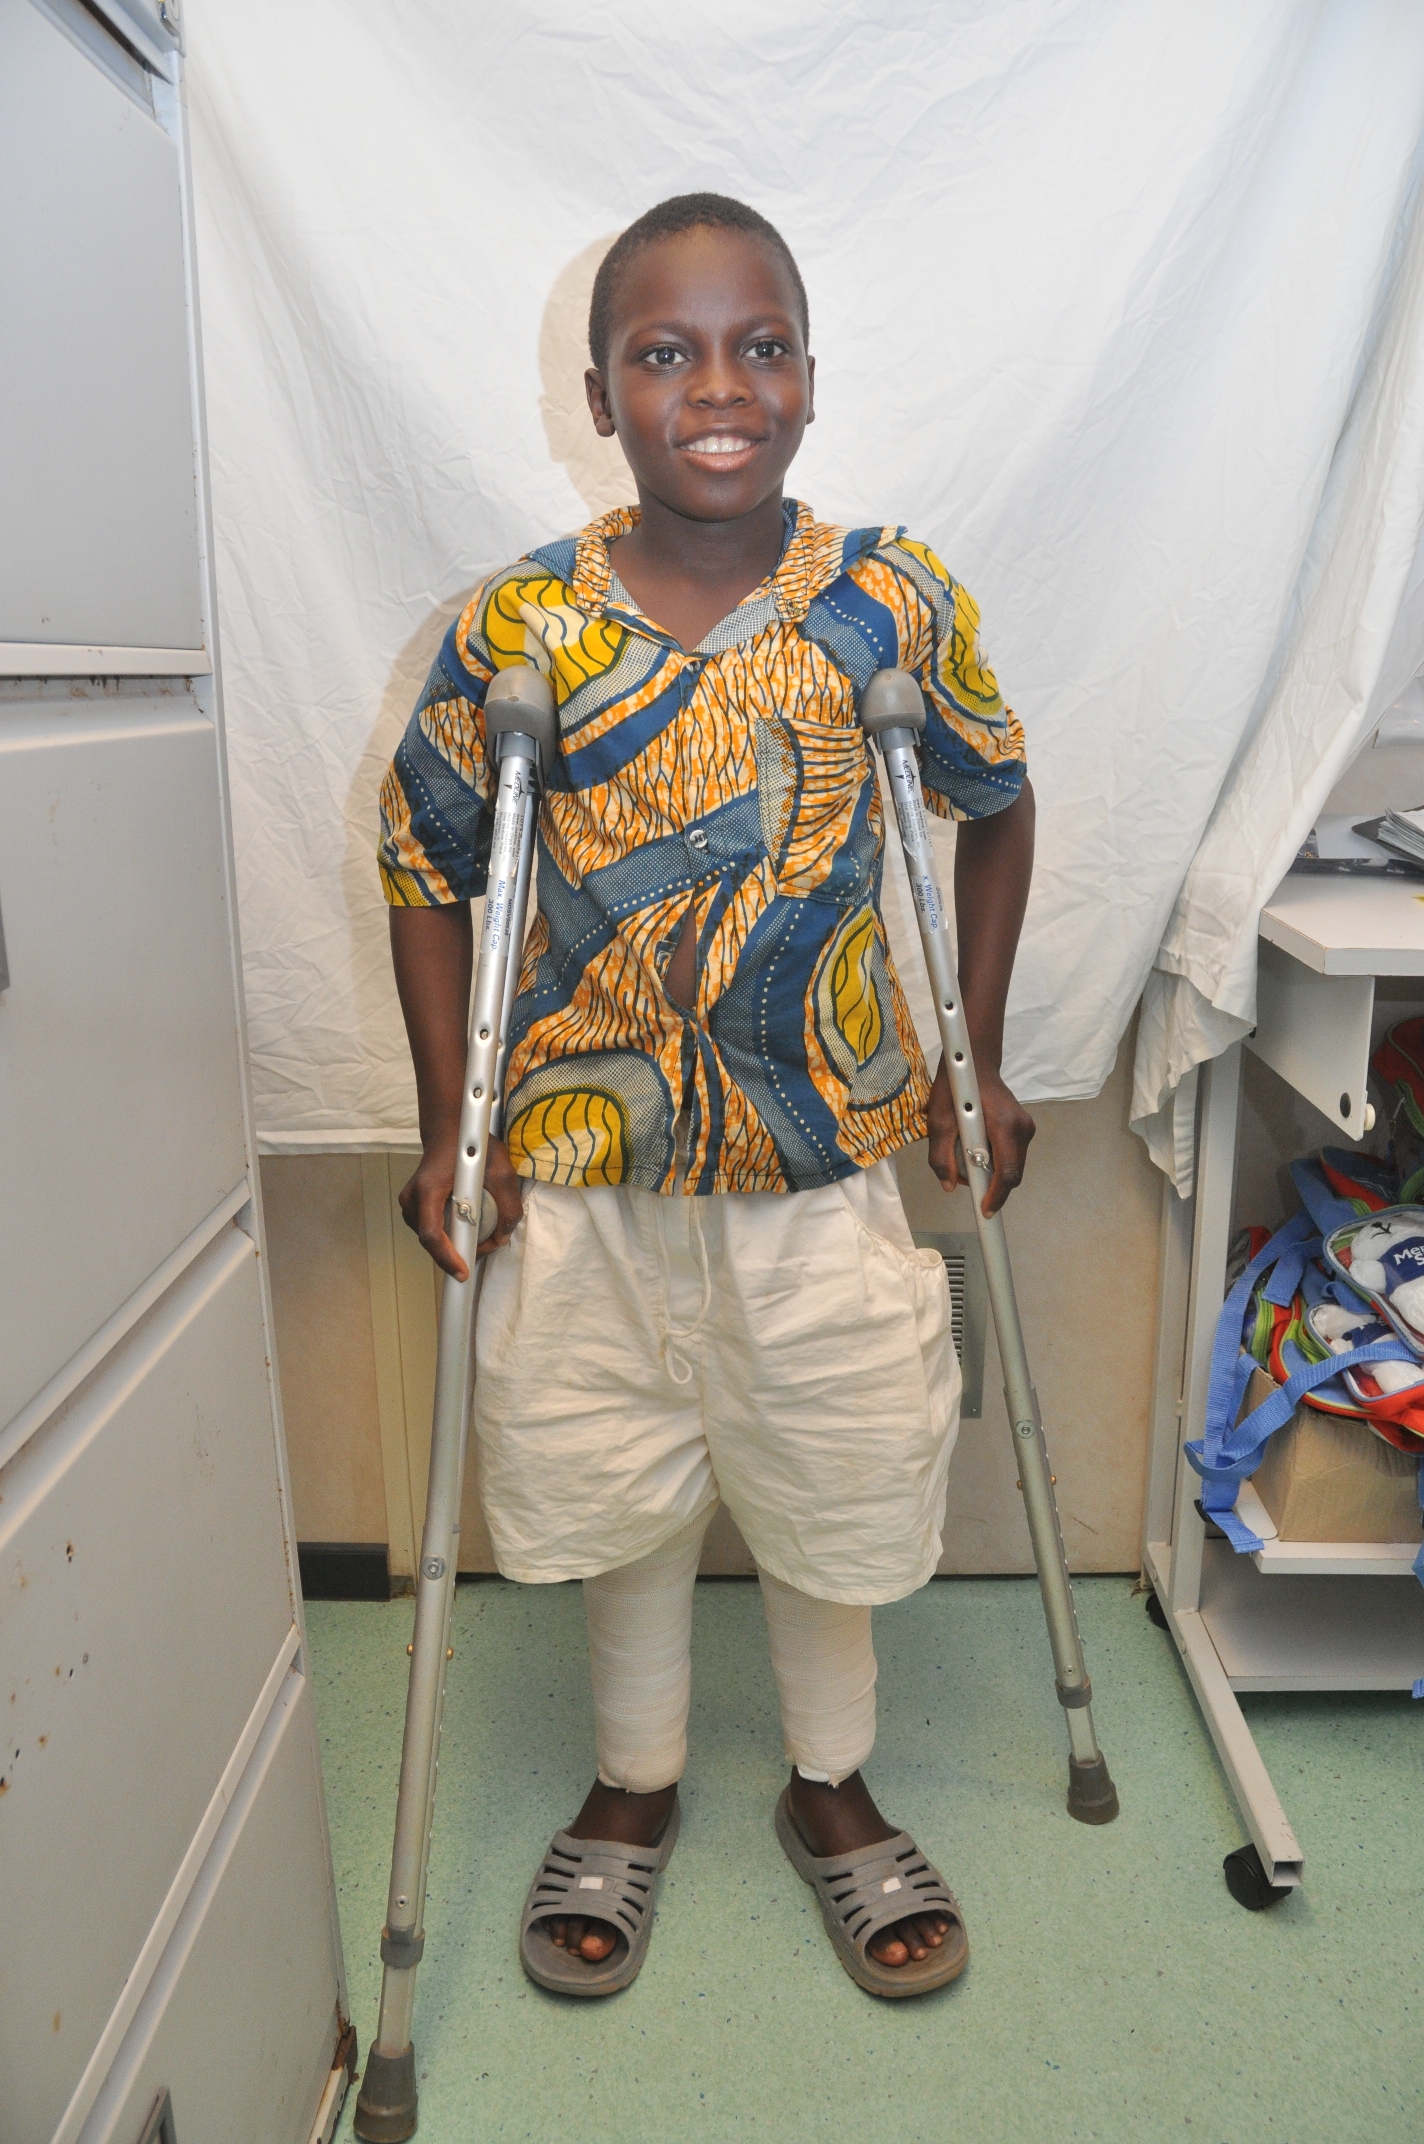 Mercy Ships Helps Disabled Boy Walk Straight into a Better Life